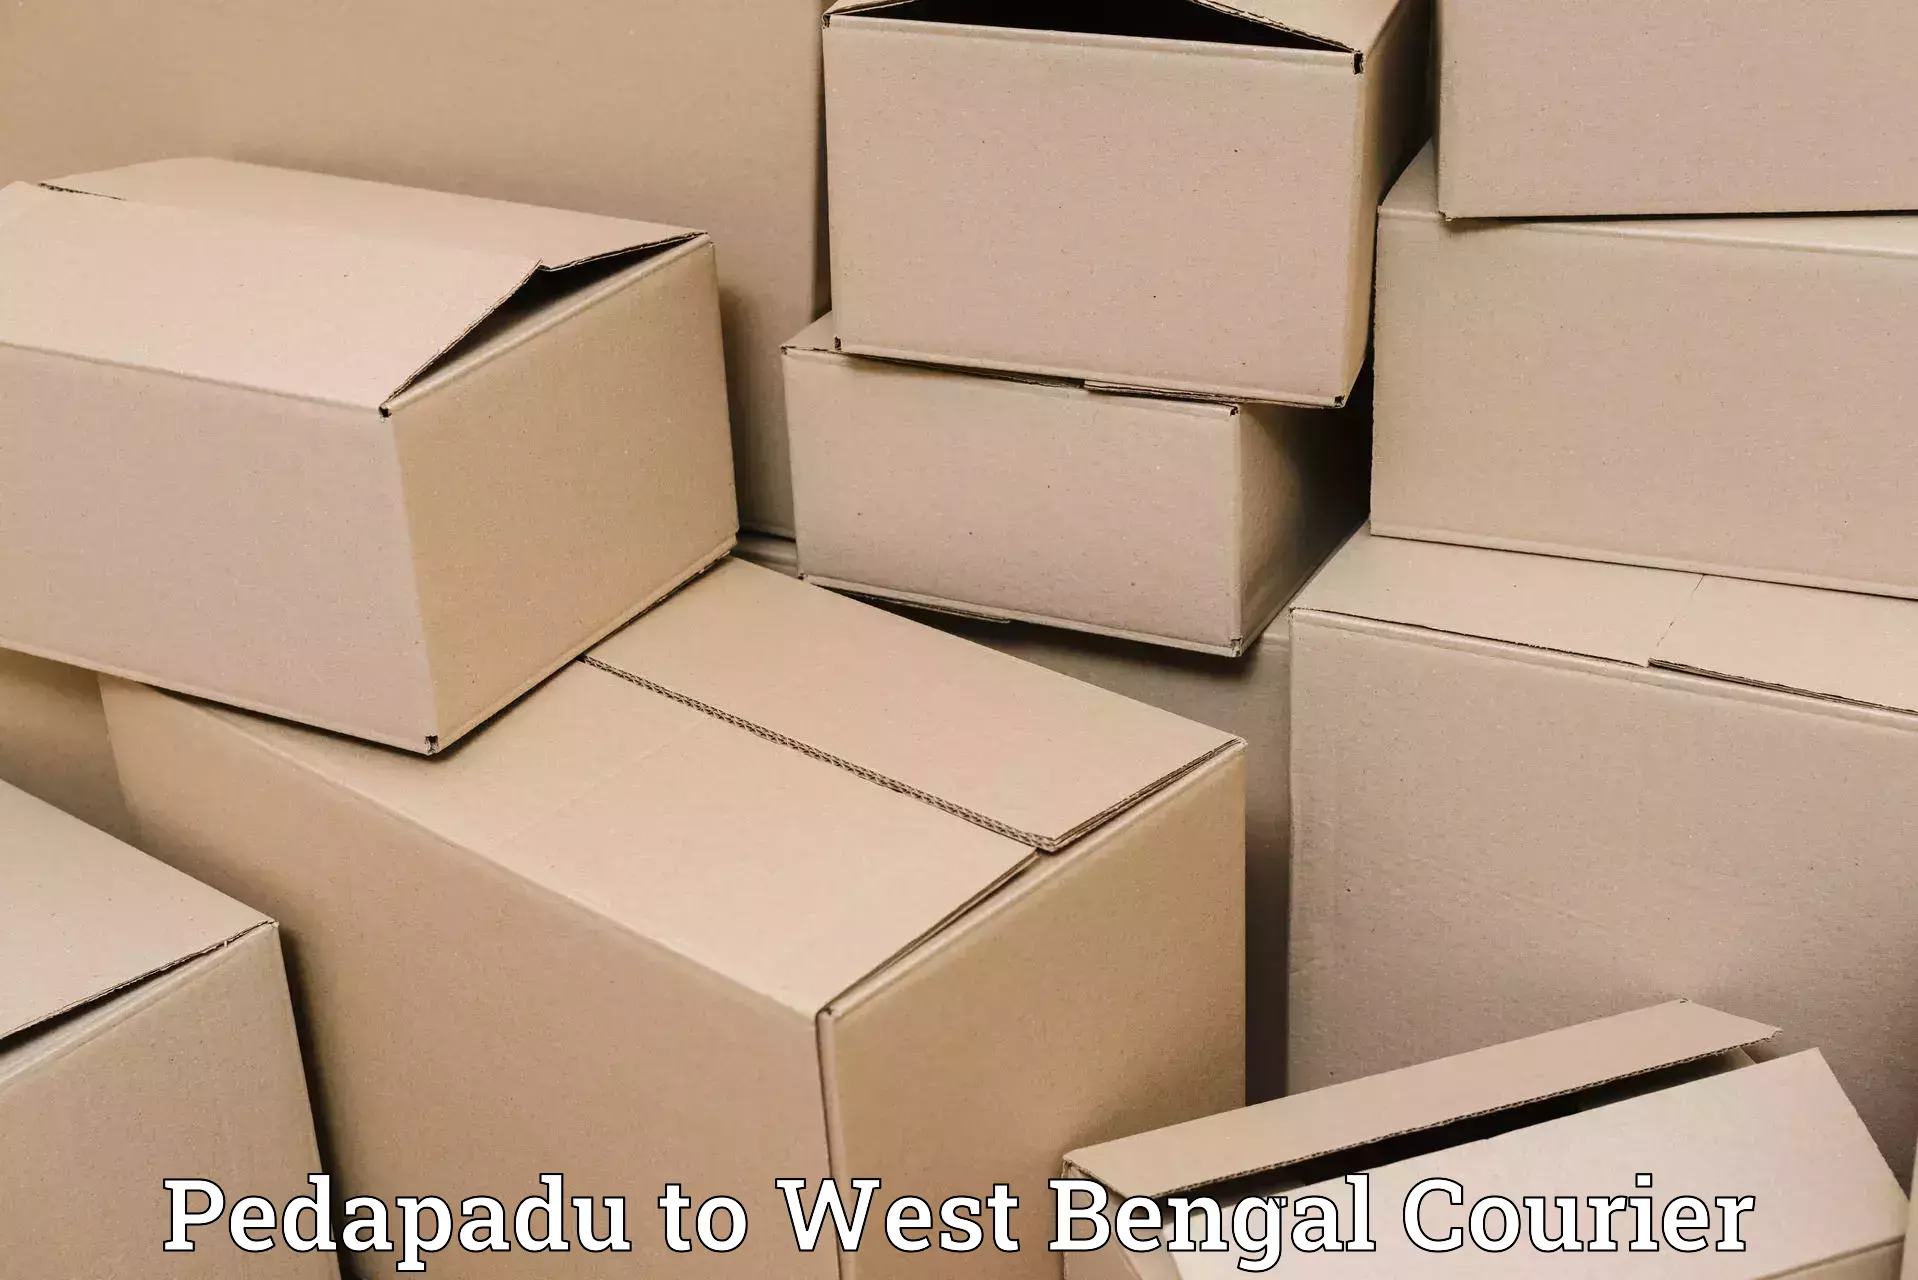 Package delivery network Pedapadu to Nanoor